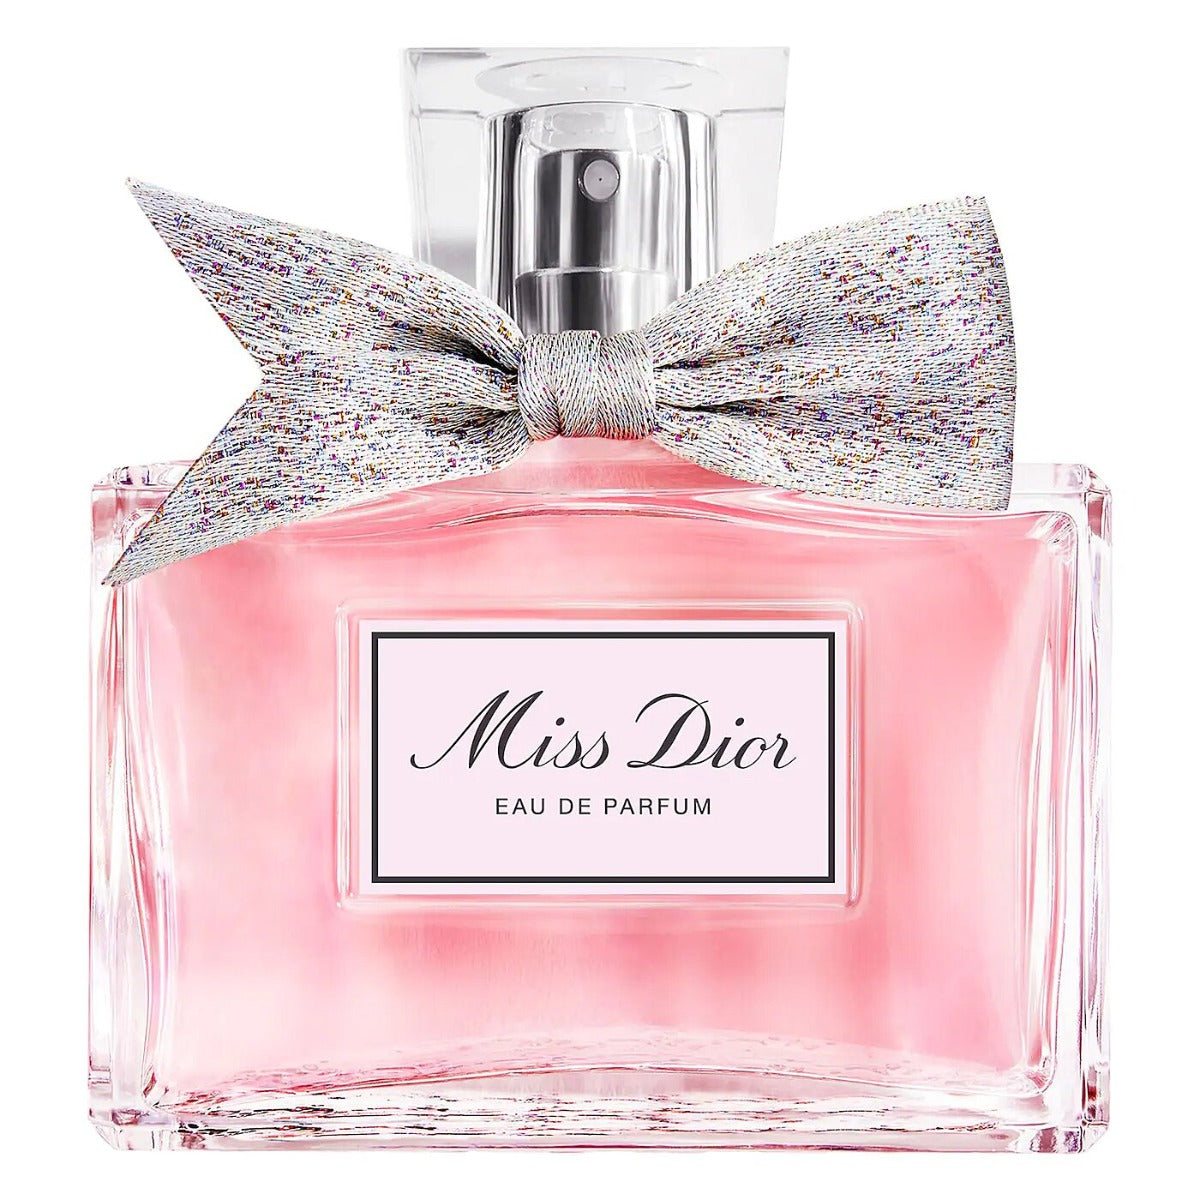 Buy Christian Dior Miss Dior EDP for Women - 100ml in Pakistan